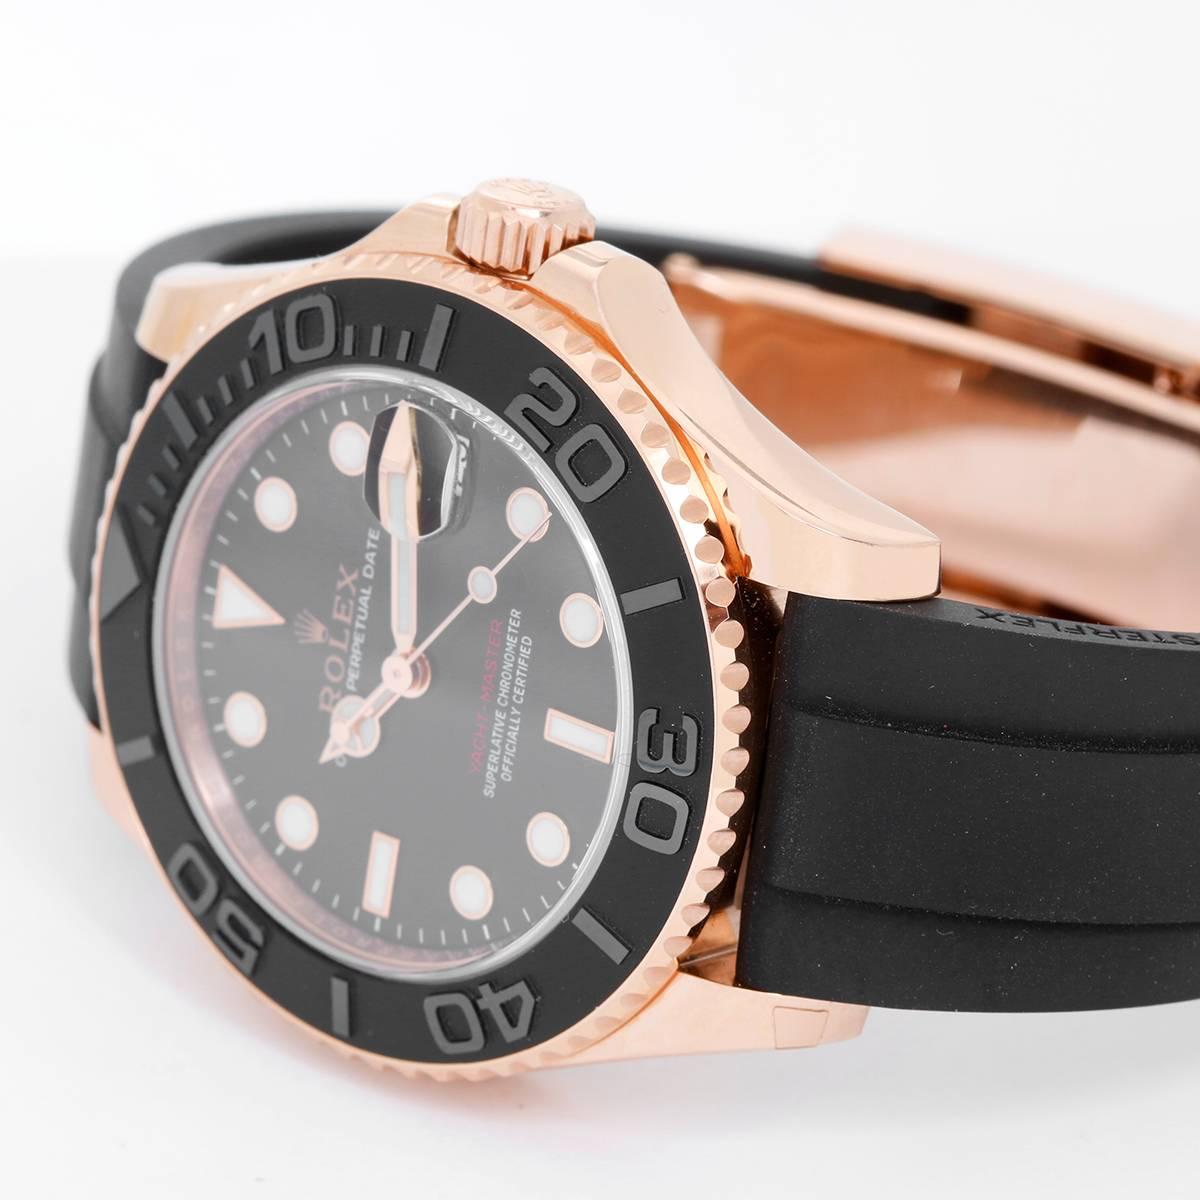 Rolex 18k Everose Rose Gold Yacht-Master  Black Rubber Strap Watch -  Automatic winding. 18k rose gold Everose case (37mm diameter). Black dial with luminous-style markers. Black rubber strap band and 18k rose gold Rolex deployant clasp. Pre-owned